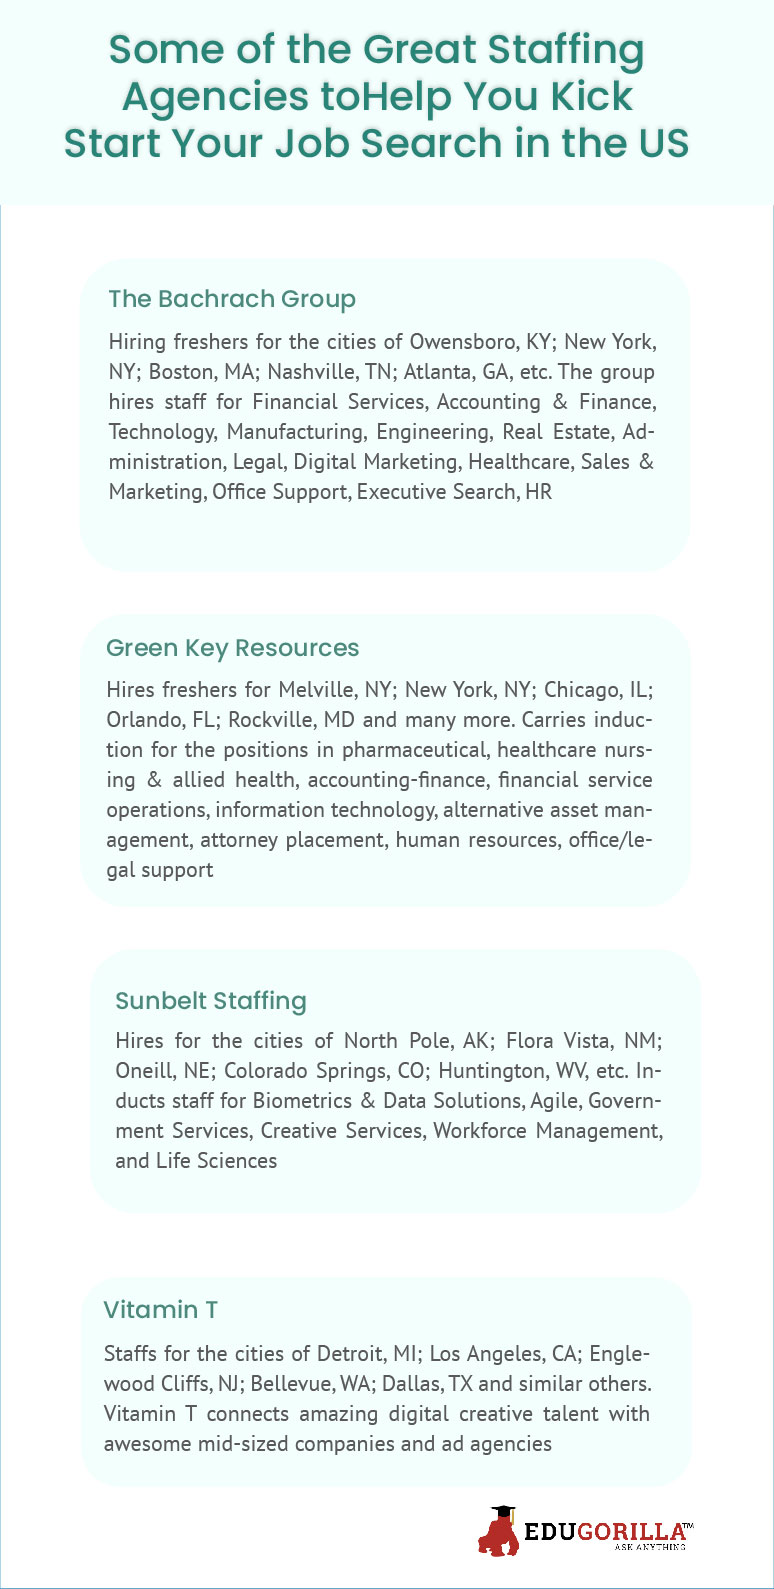 Some of the Great Staffing Agencies to Help You Kick Start Your Job Search in the US